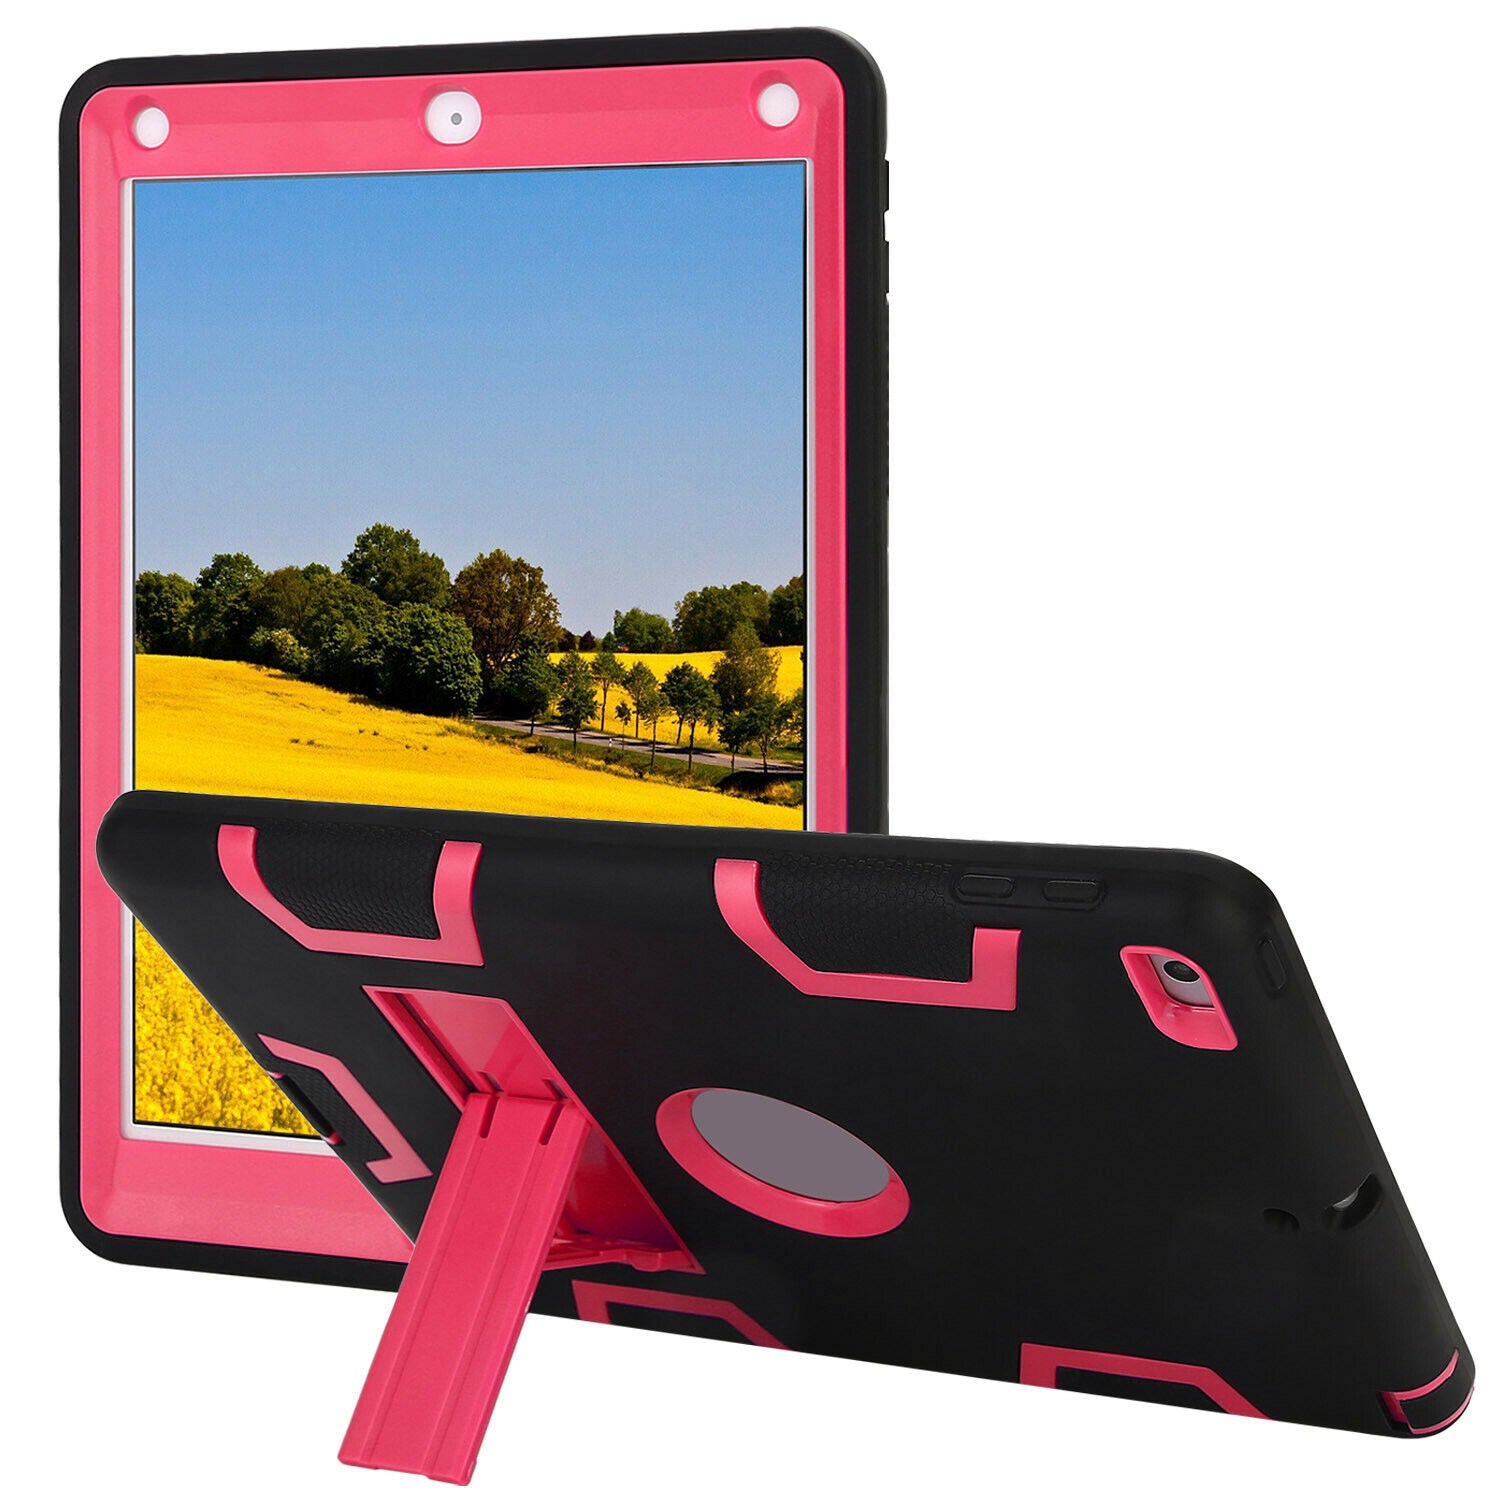 Kids Shockproof Case Heavy Duty Tough Kick Stand Cover for iPad Pro9.7"